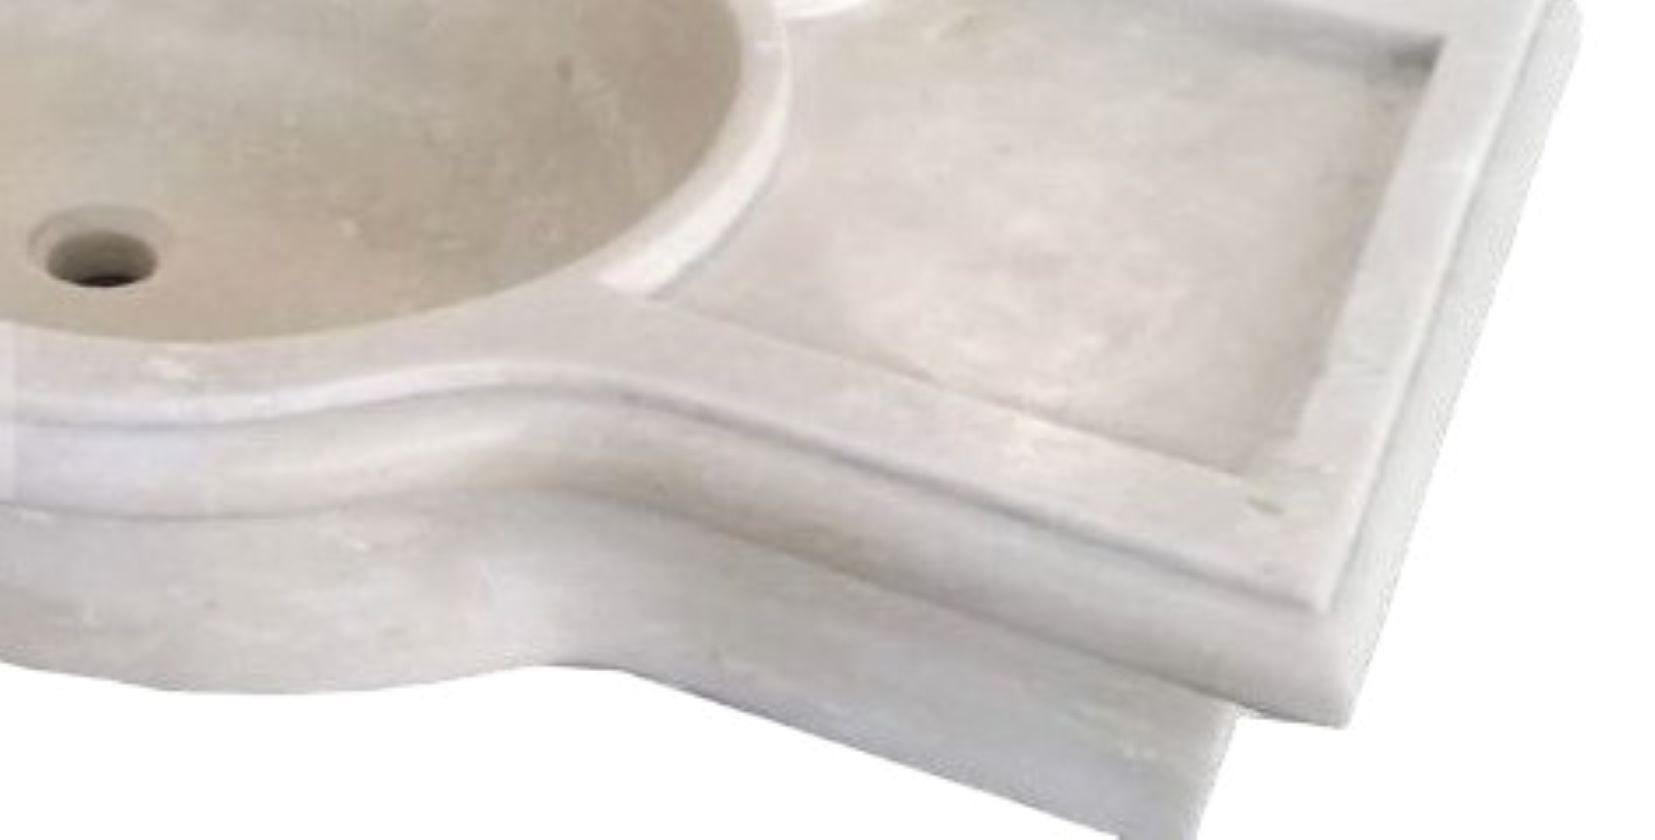 This timeless beautiful Italian classical sink is cut from one single block of white marble, these designs have not changed since Greek and Roman times, it carries superb artistic merit easily fitting in with old and new buildings.

 
 